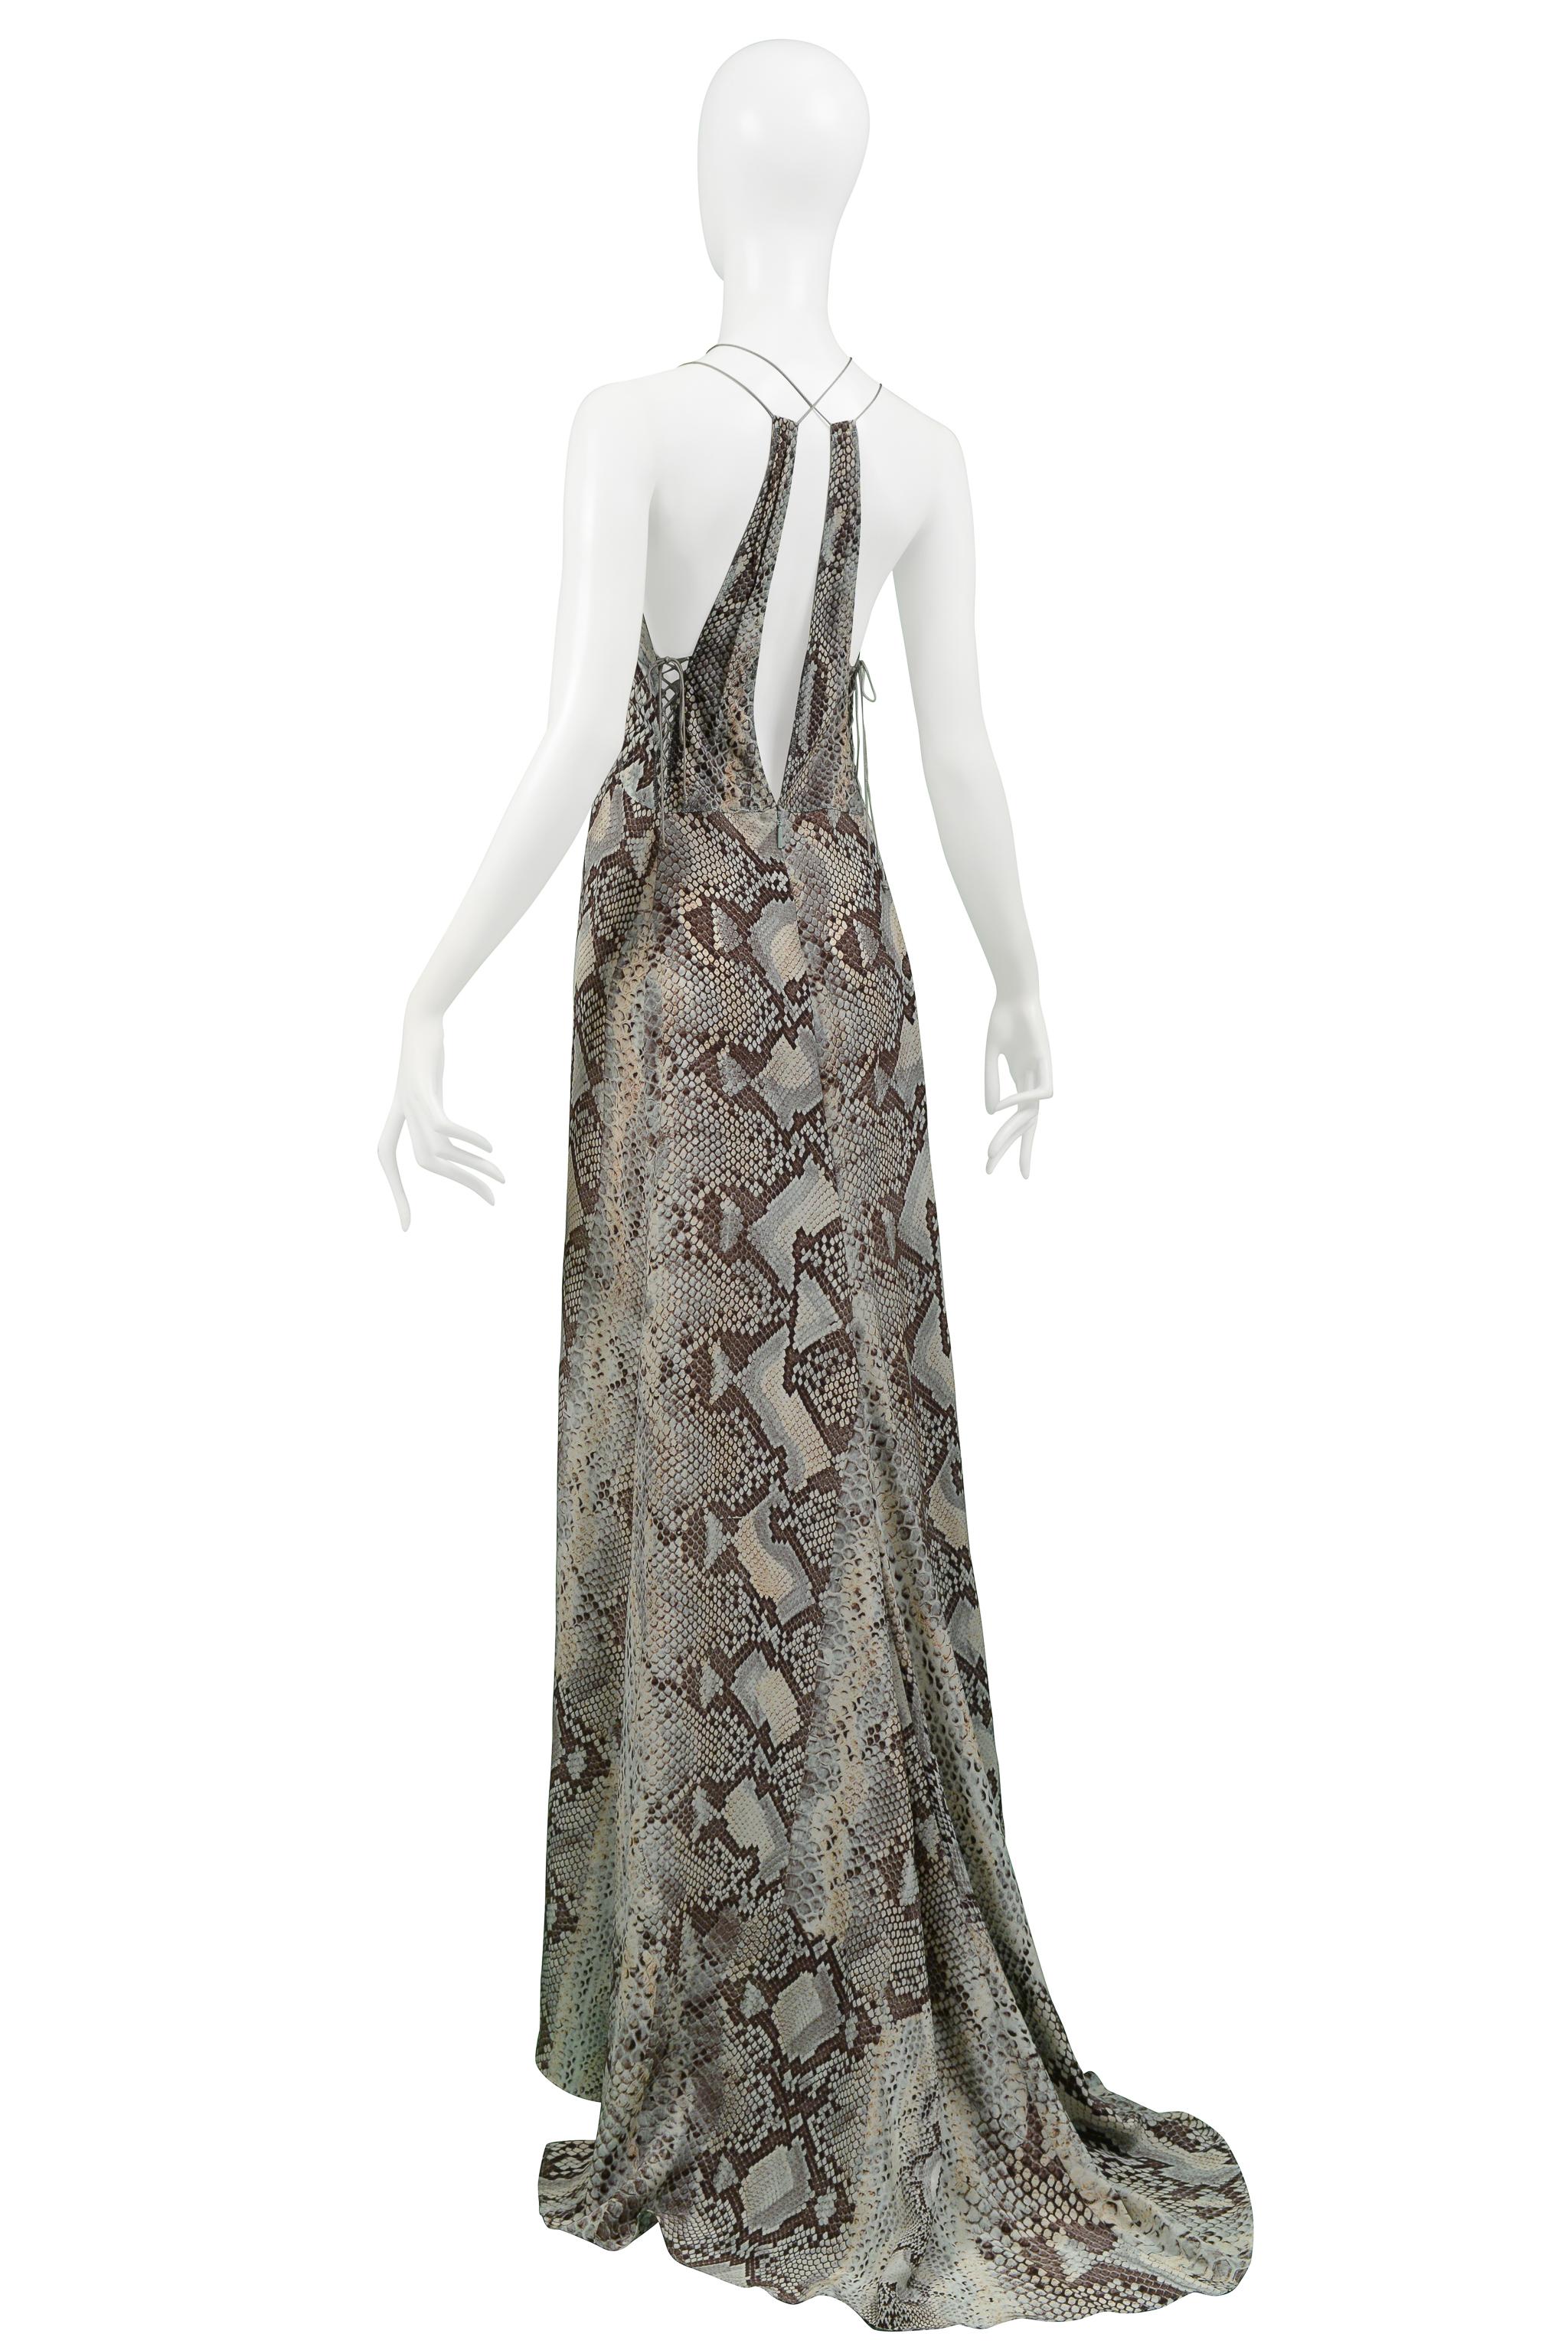 Roberto Cavalli Blue & Grey Snake Print Evening Gown With Silver Hardware 2011 For Sale 3